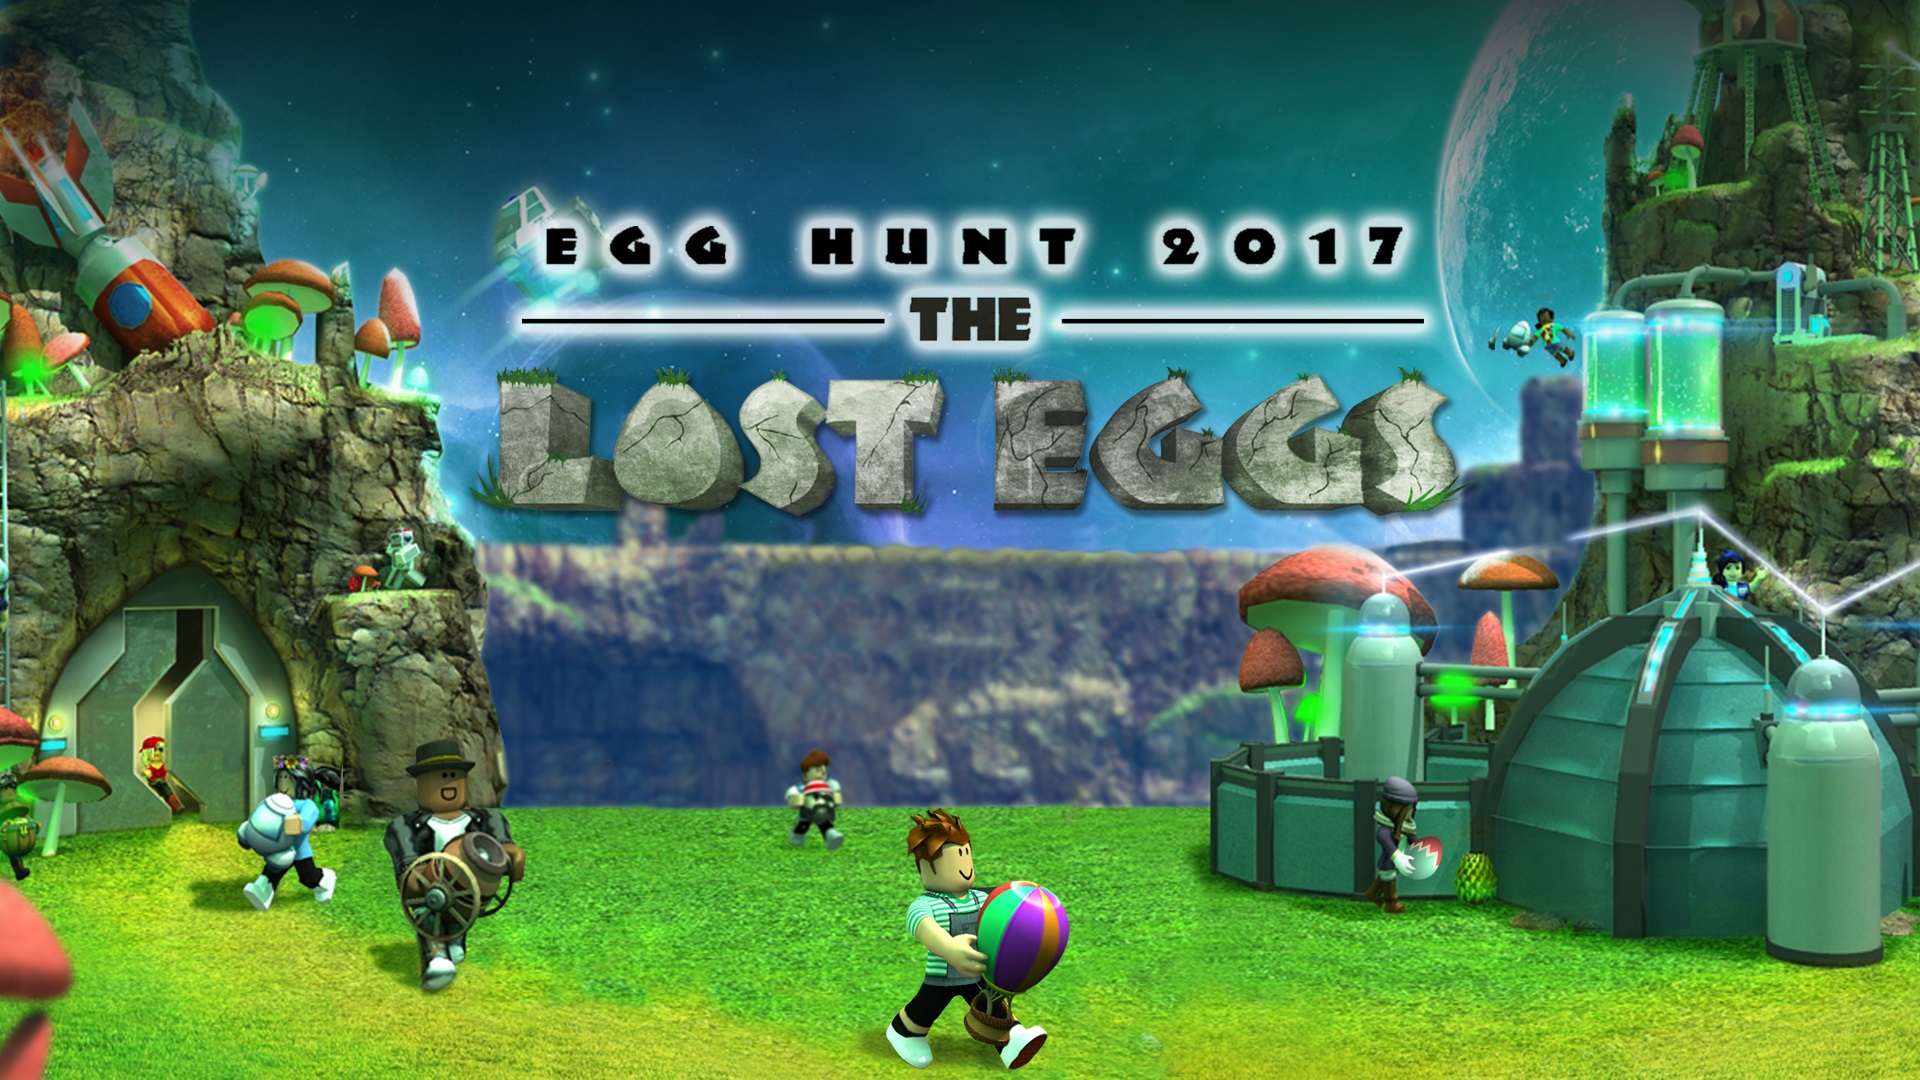 Egg Hunt 2017 The Lost Eggs Roblox Wikia Fandom - how to get the stultorum egg in the 2019 egg hunt scrambled in time roblox